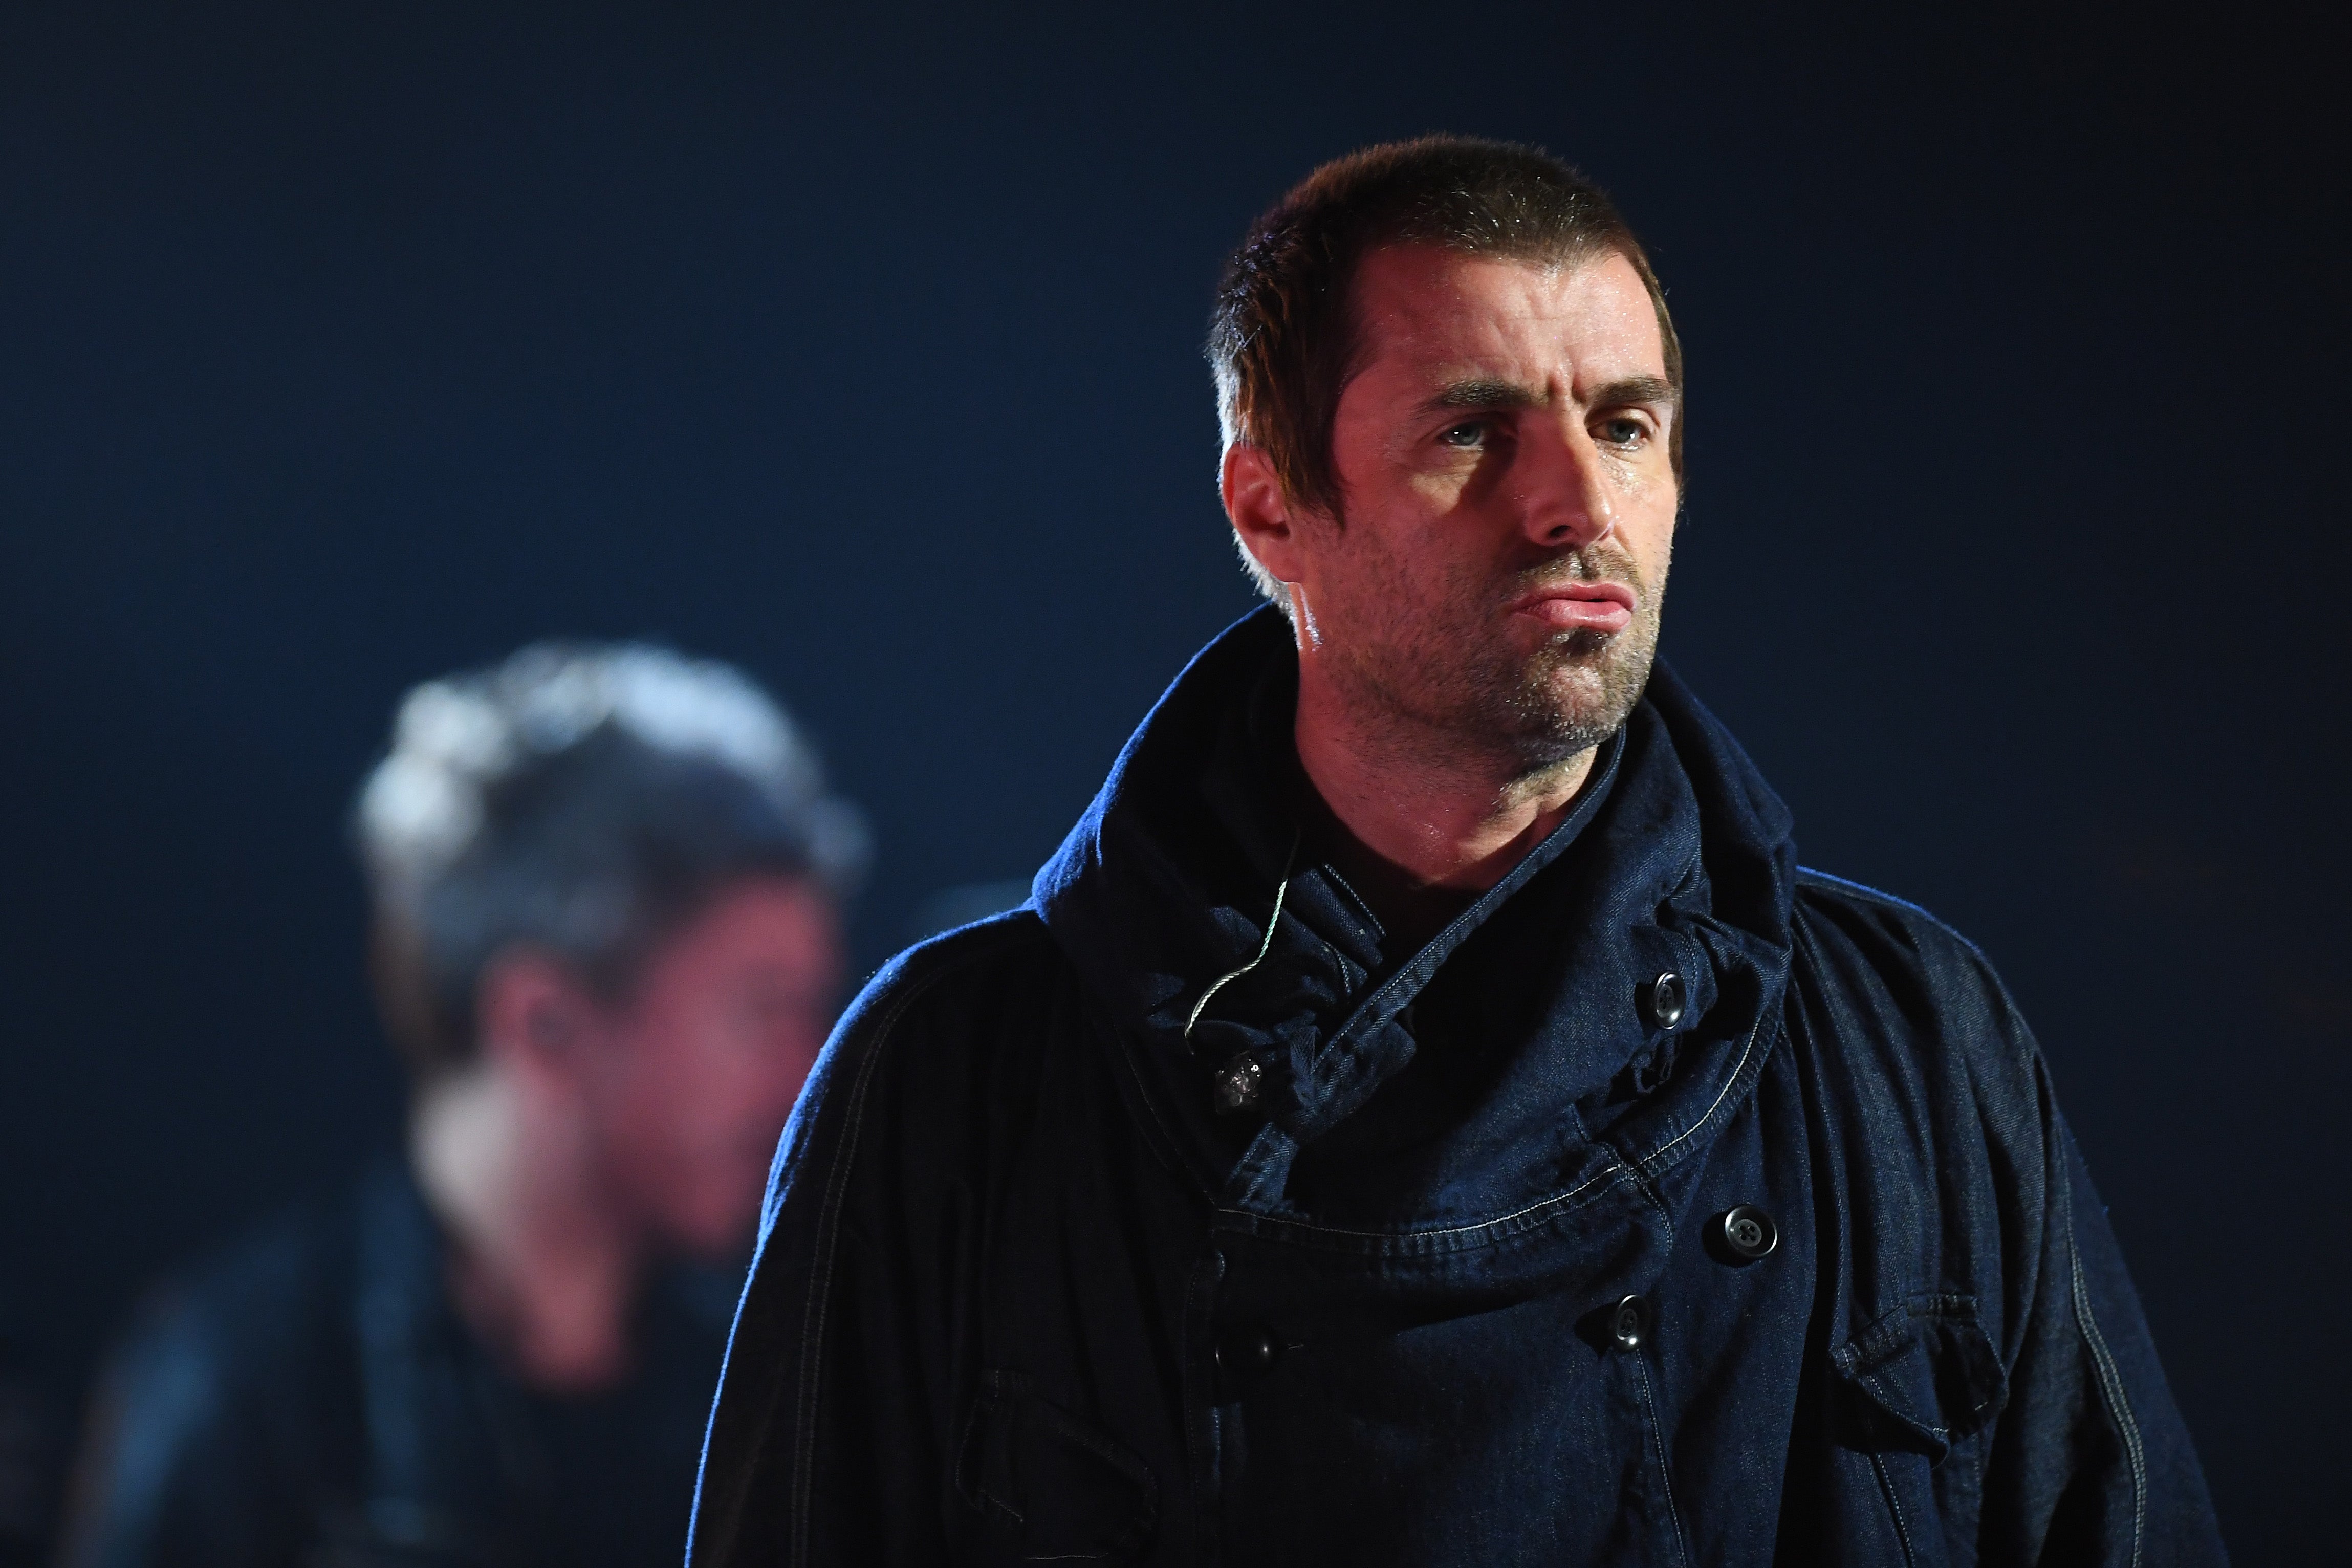 The incident took place at a show by the former Oasis frontman Liam Gallagher